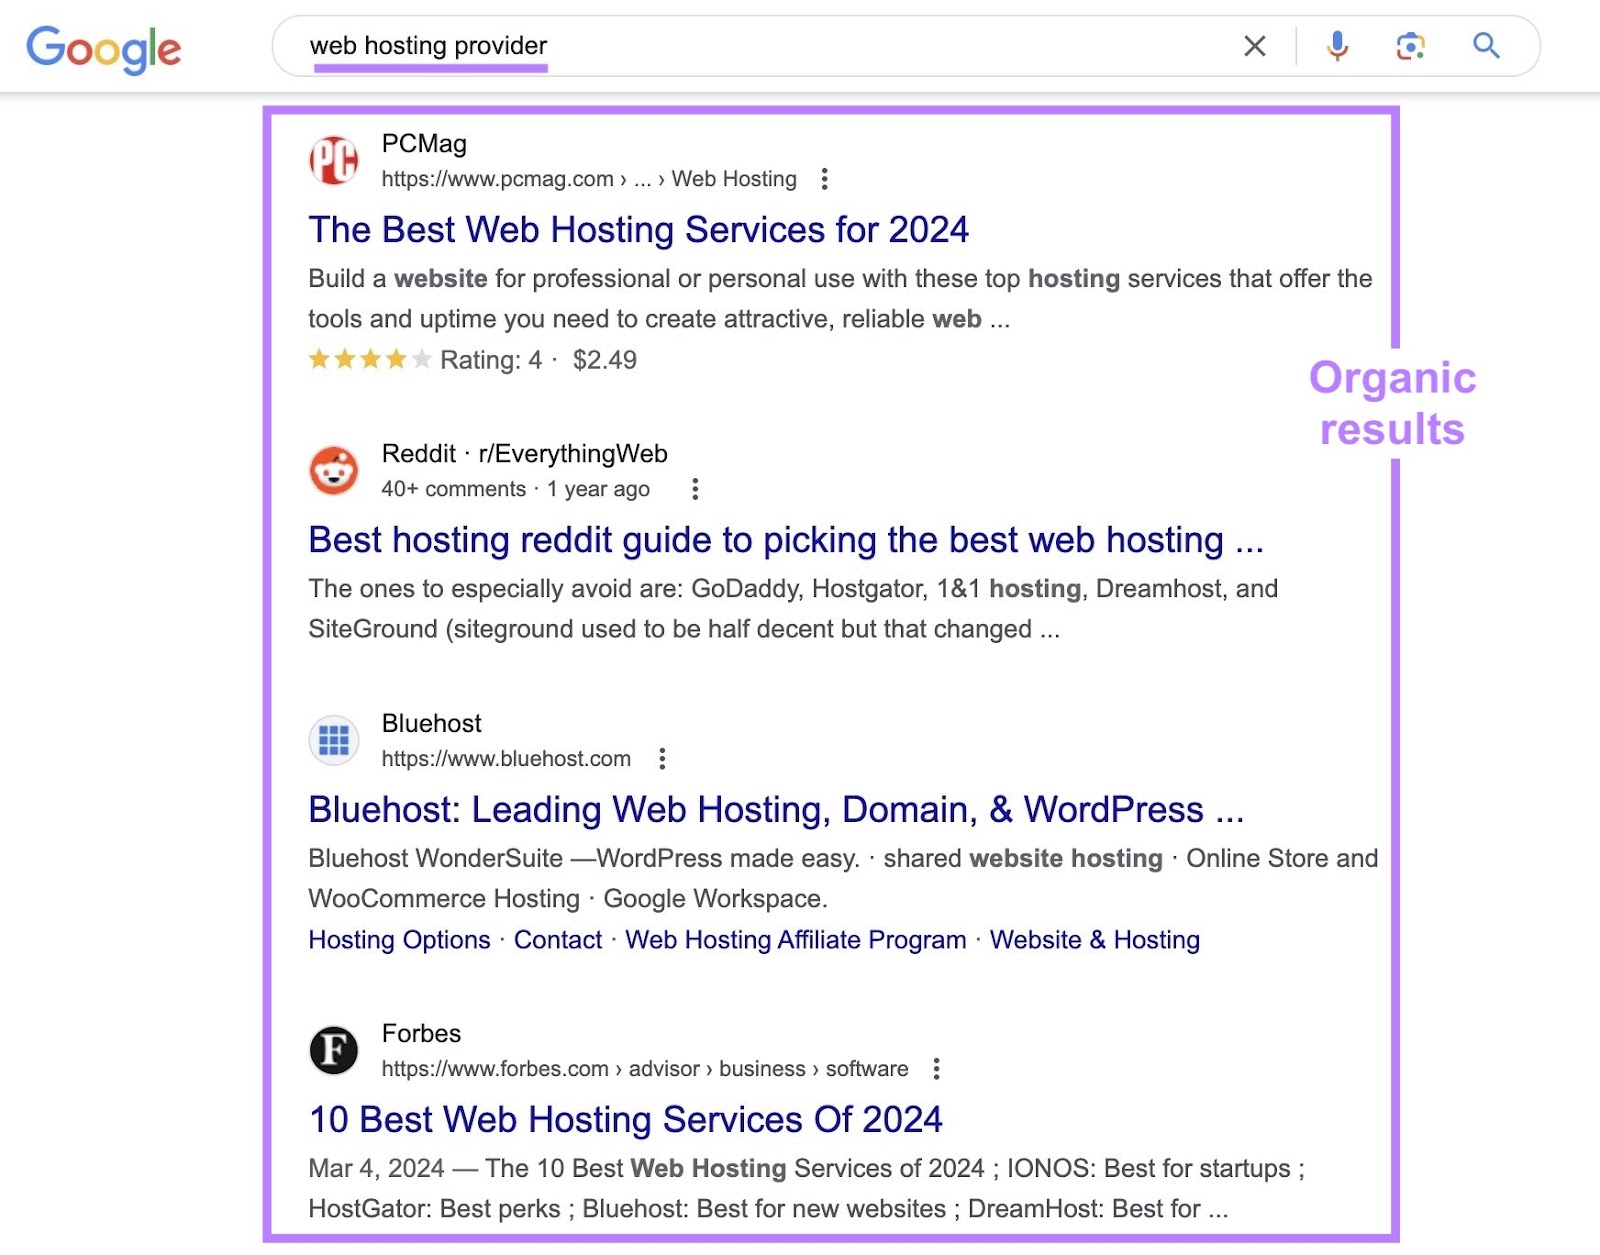 organic results connected  Google serp for "web hosting provider" query